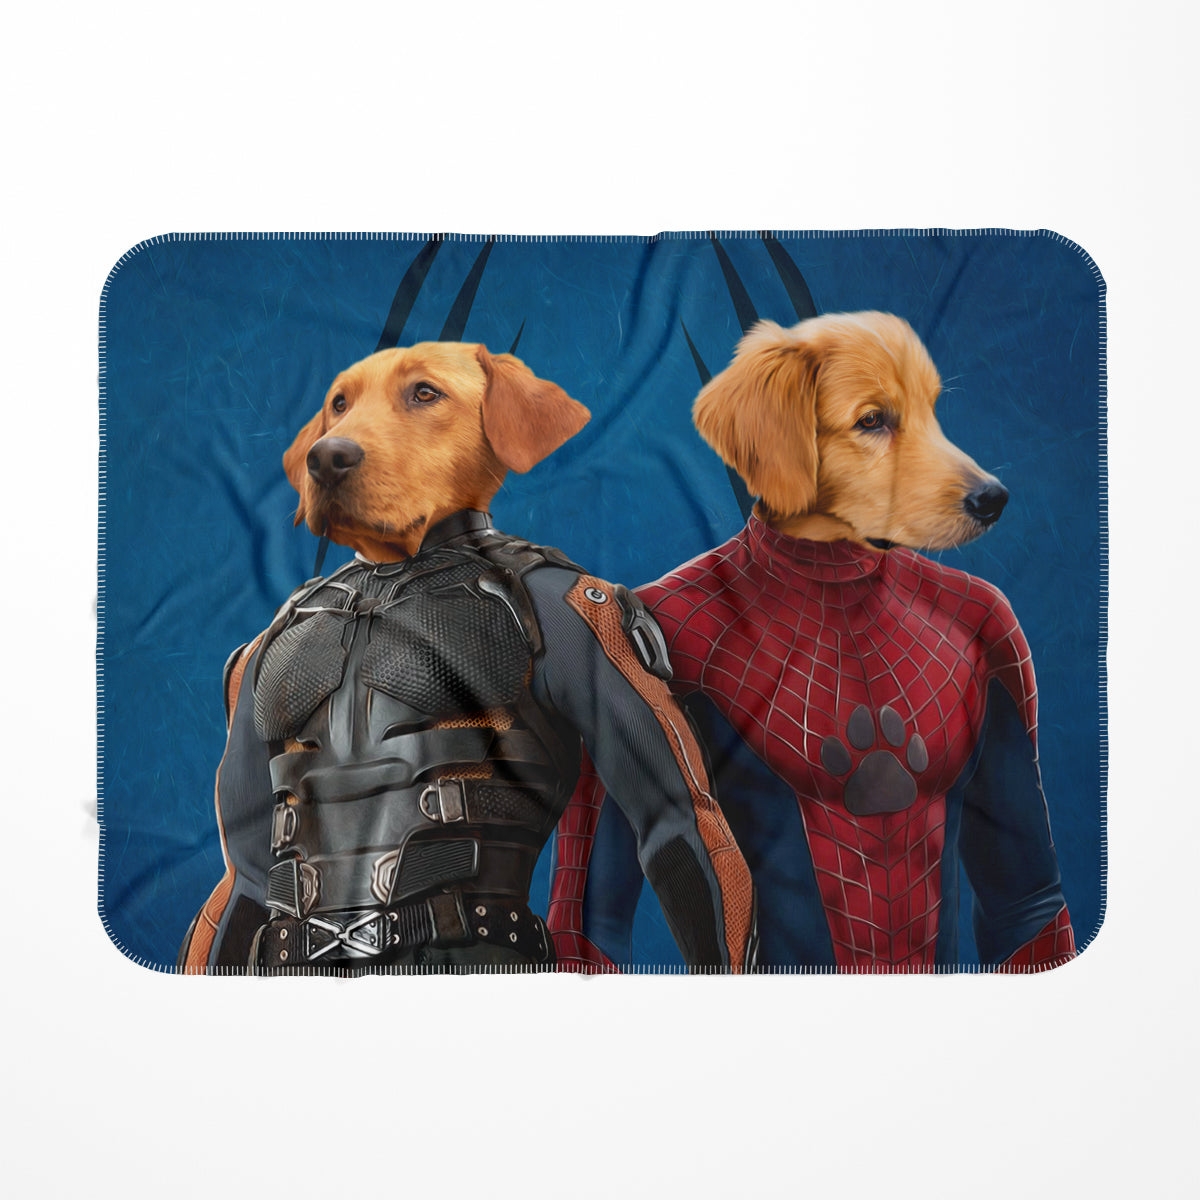 Wolverine & Spider Paw, Paw & Glory, pawandglory, personalised blanket with dog, personalized blankets for dogs, blanket with dogs face, Custom dog blanket, blanket with dog on it, personalized blanket with dog, Pet Portraits blanket,